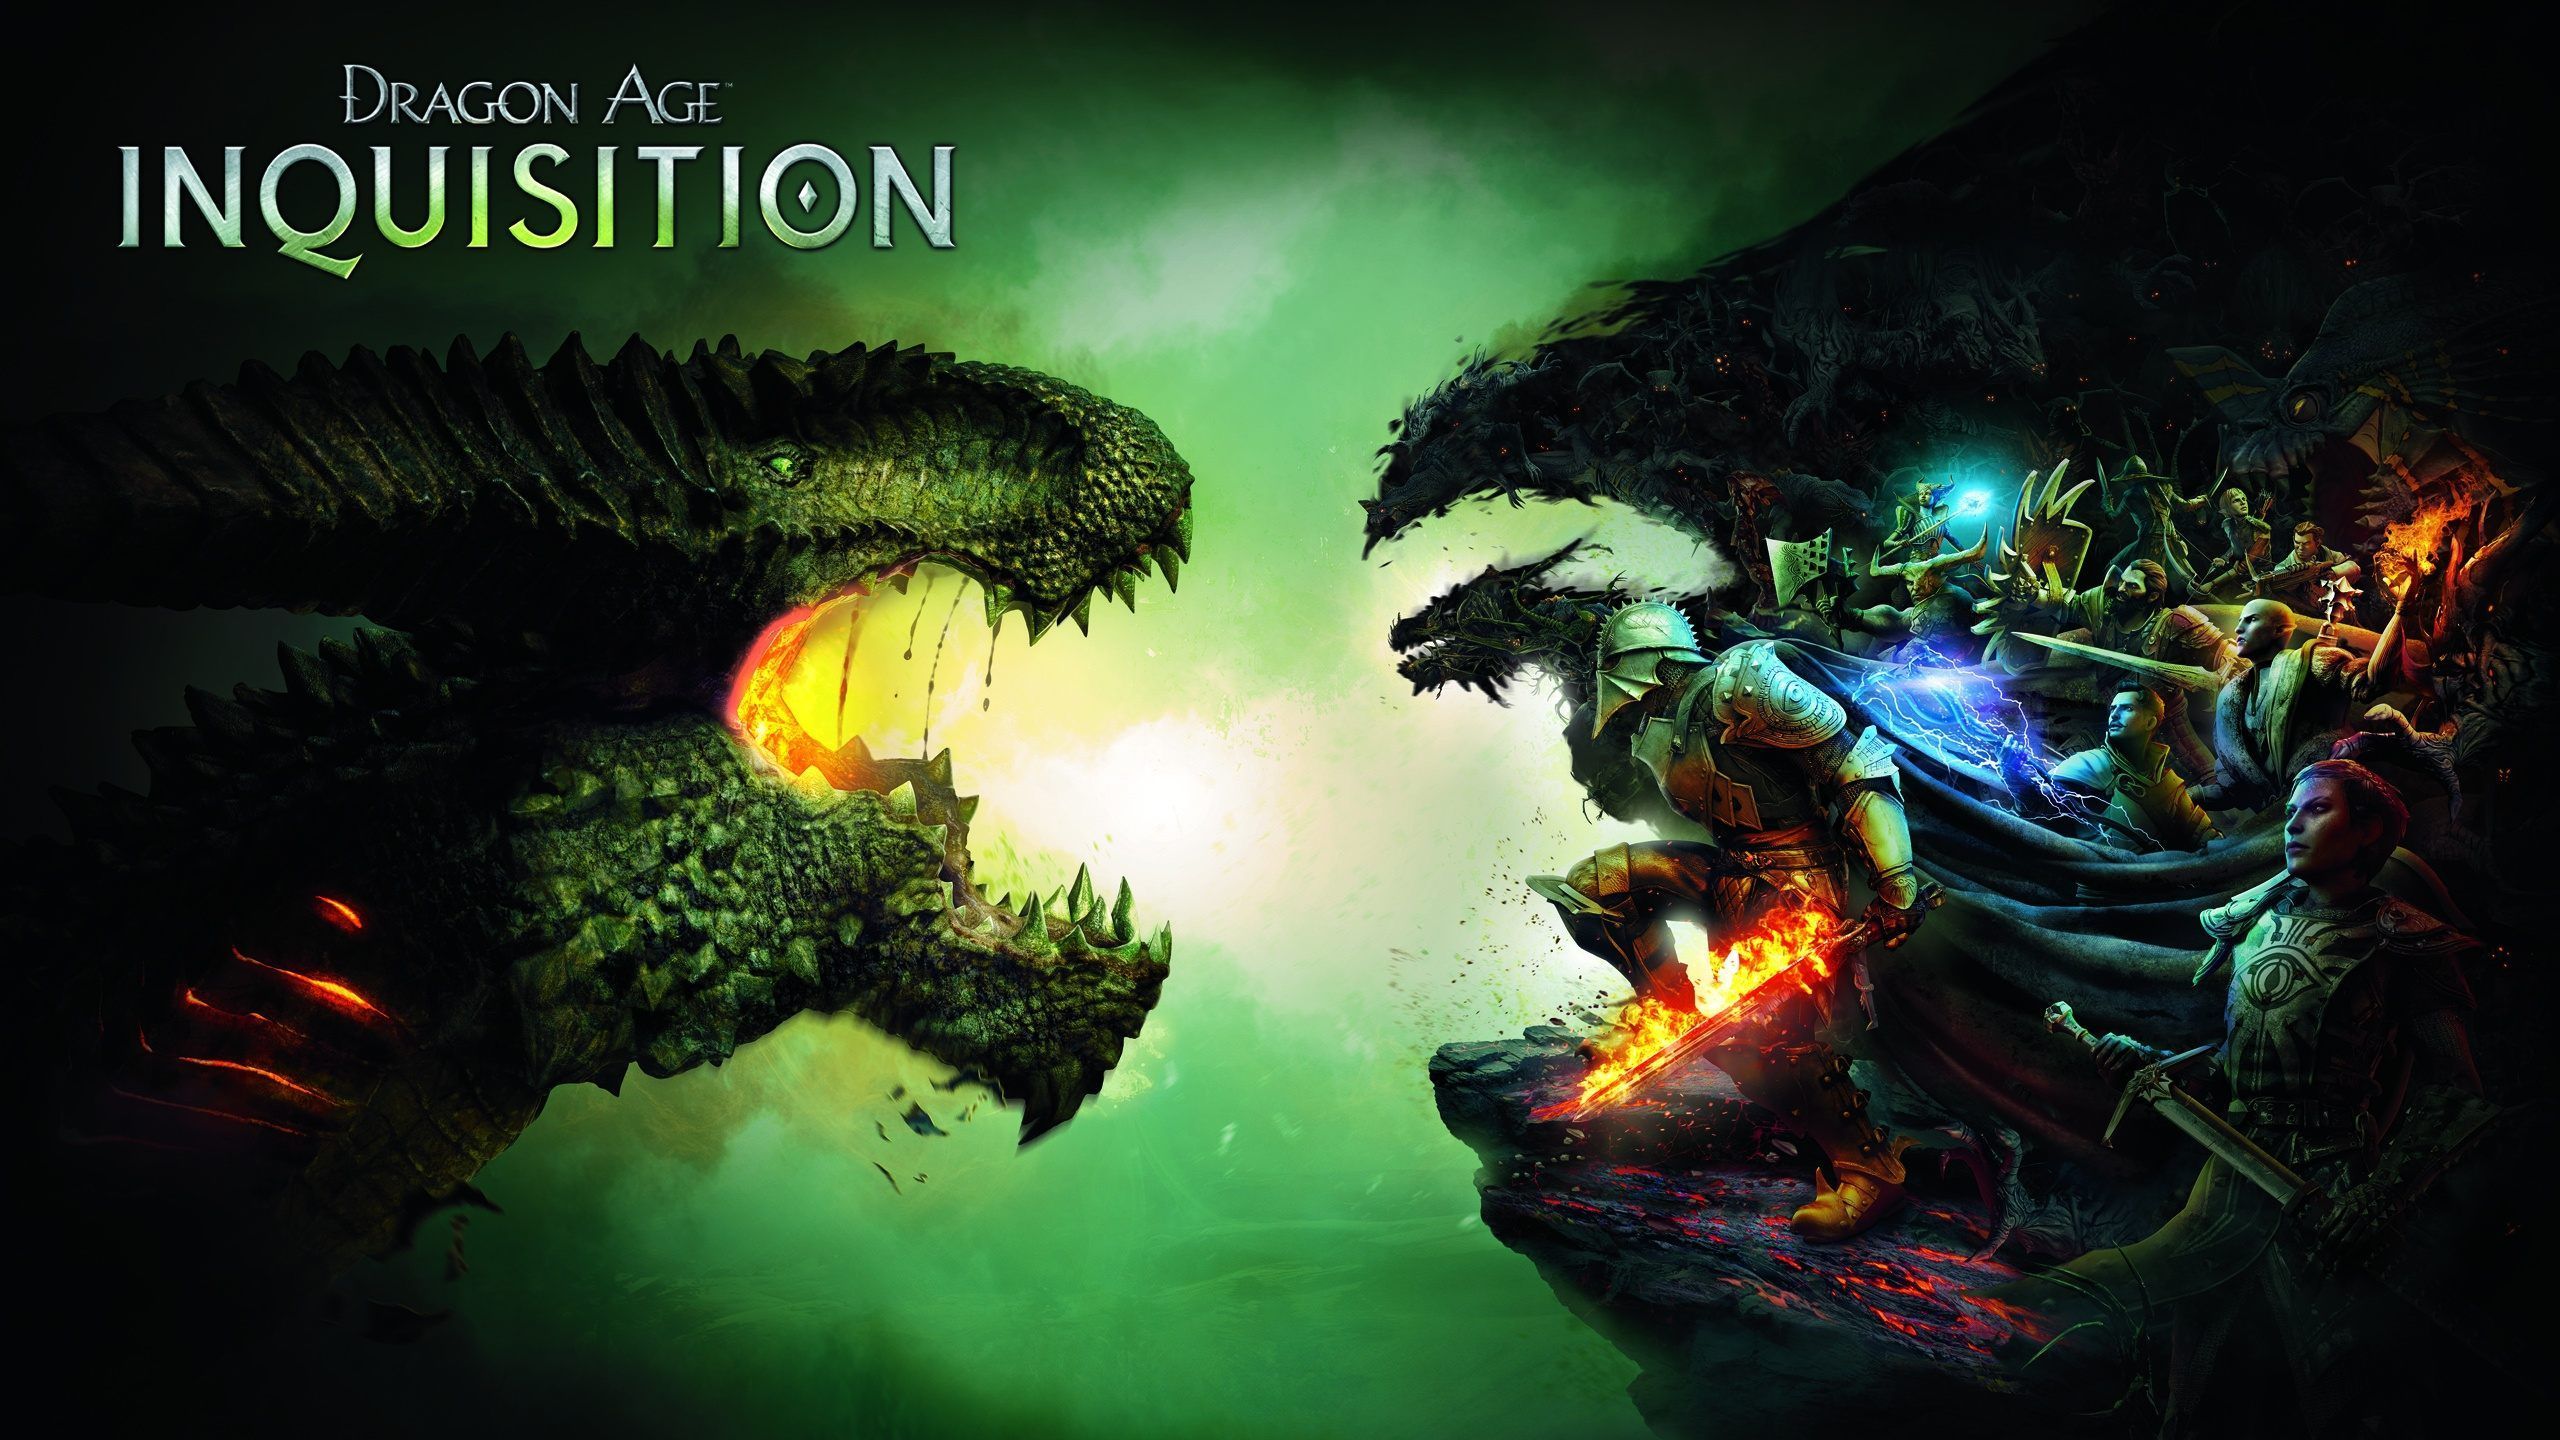 Dragon Age 3 Inquisition Gaming Wallpaper HD Download